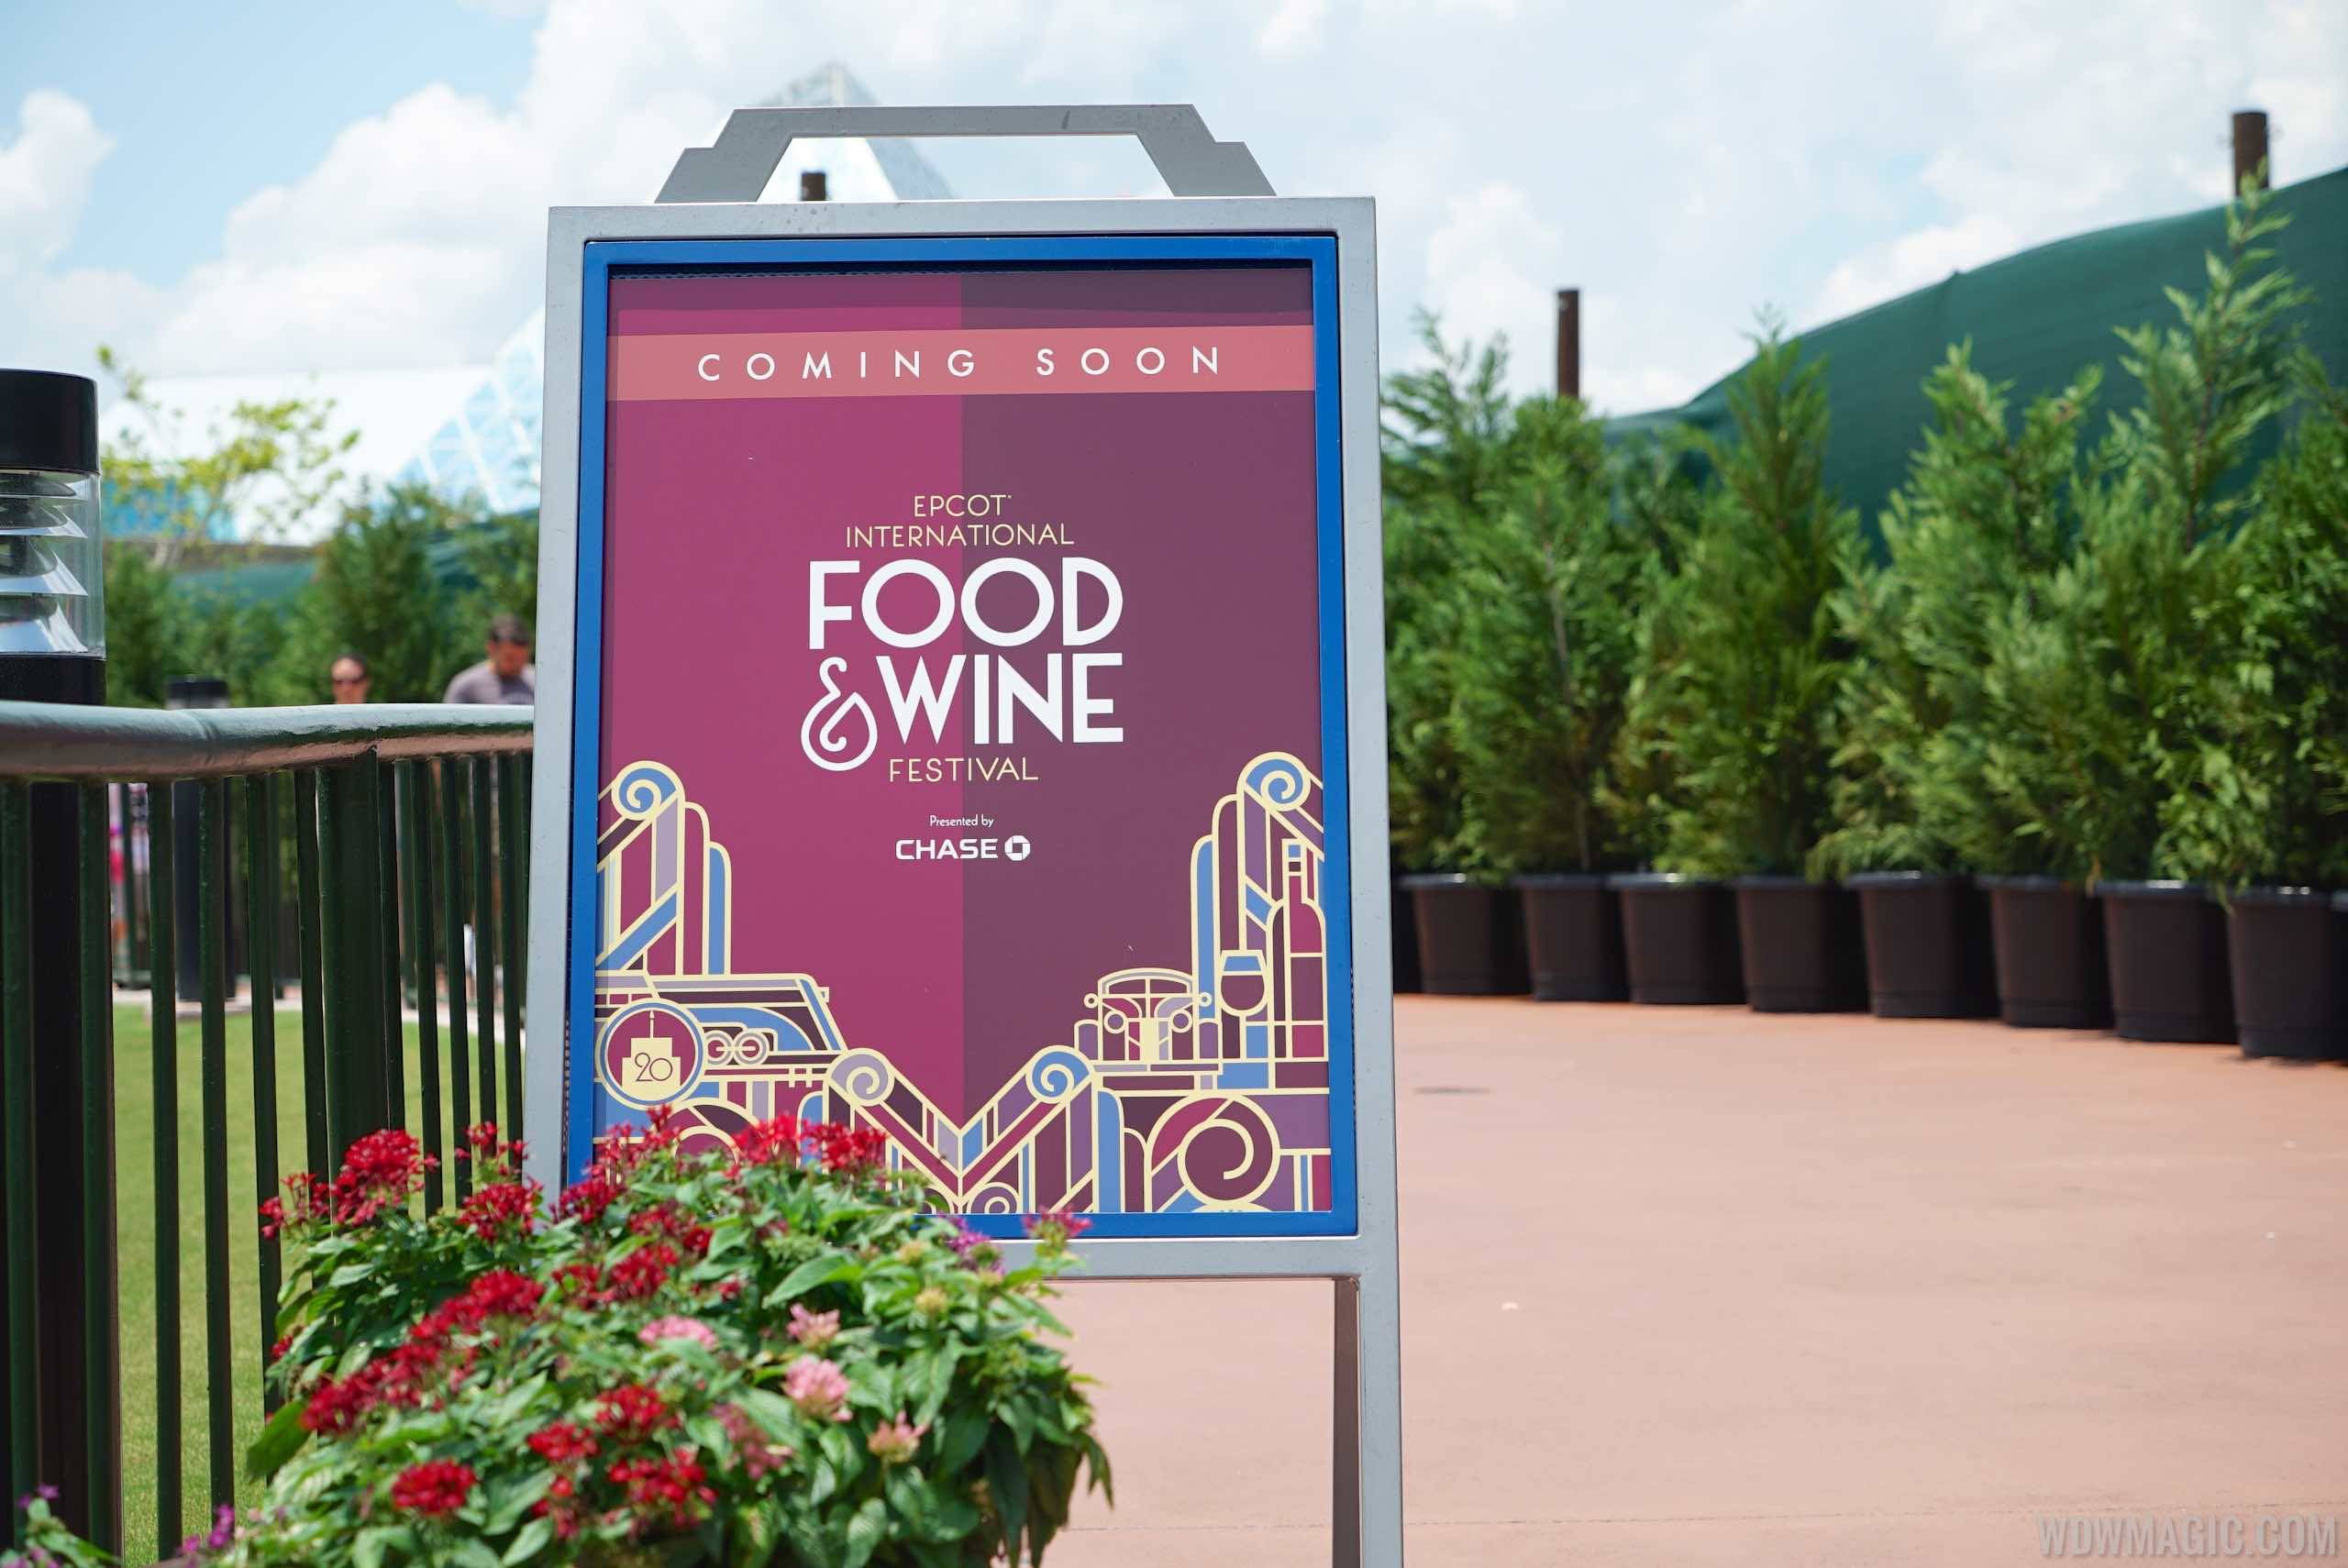 PHOTOS - Epcot Food and Wine Festival preparations underway in Future World